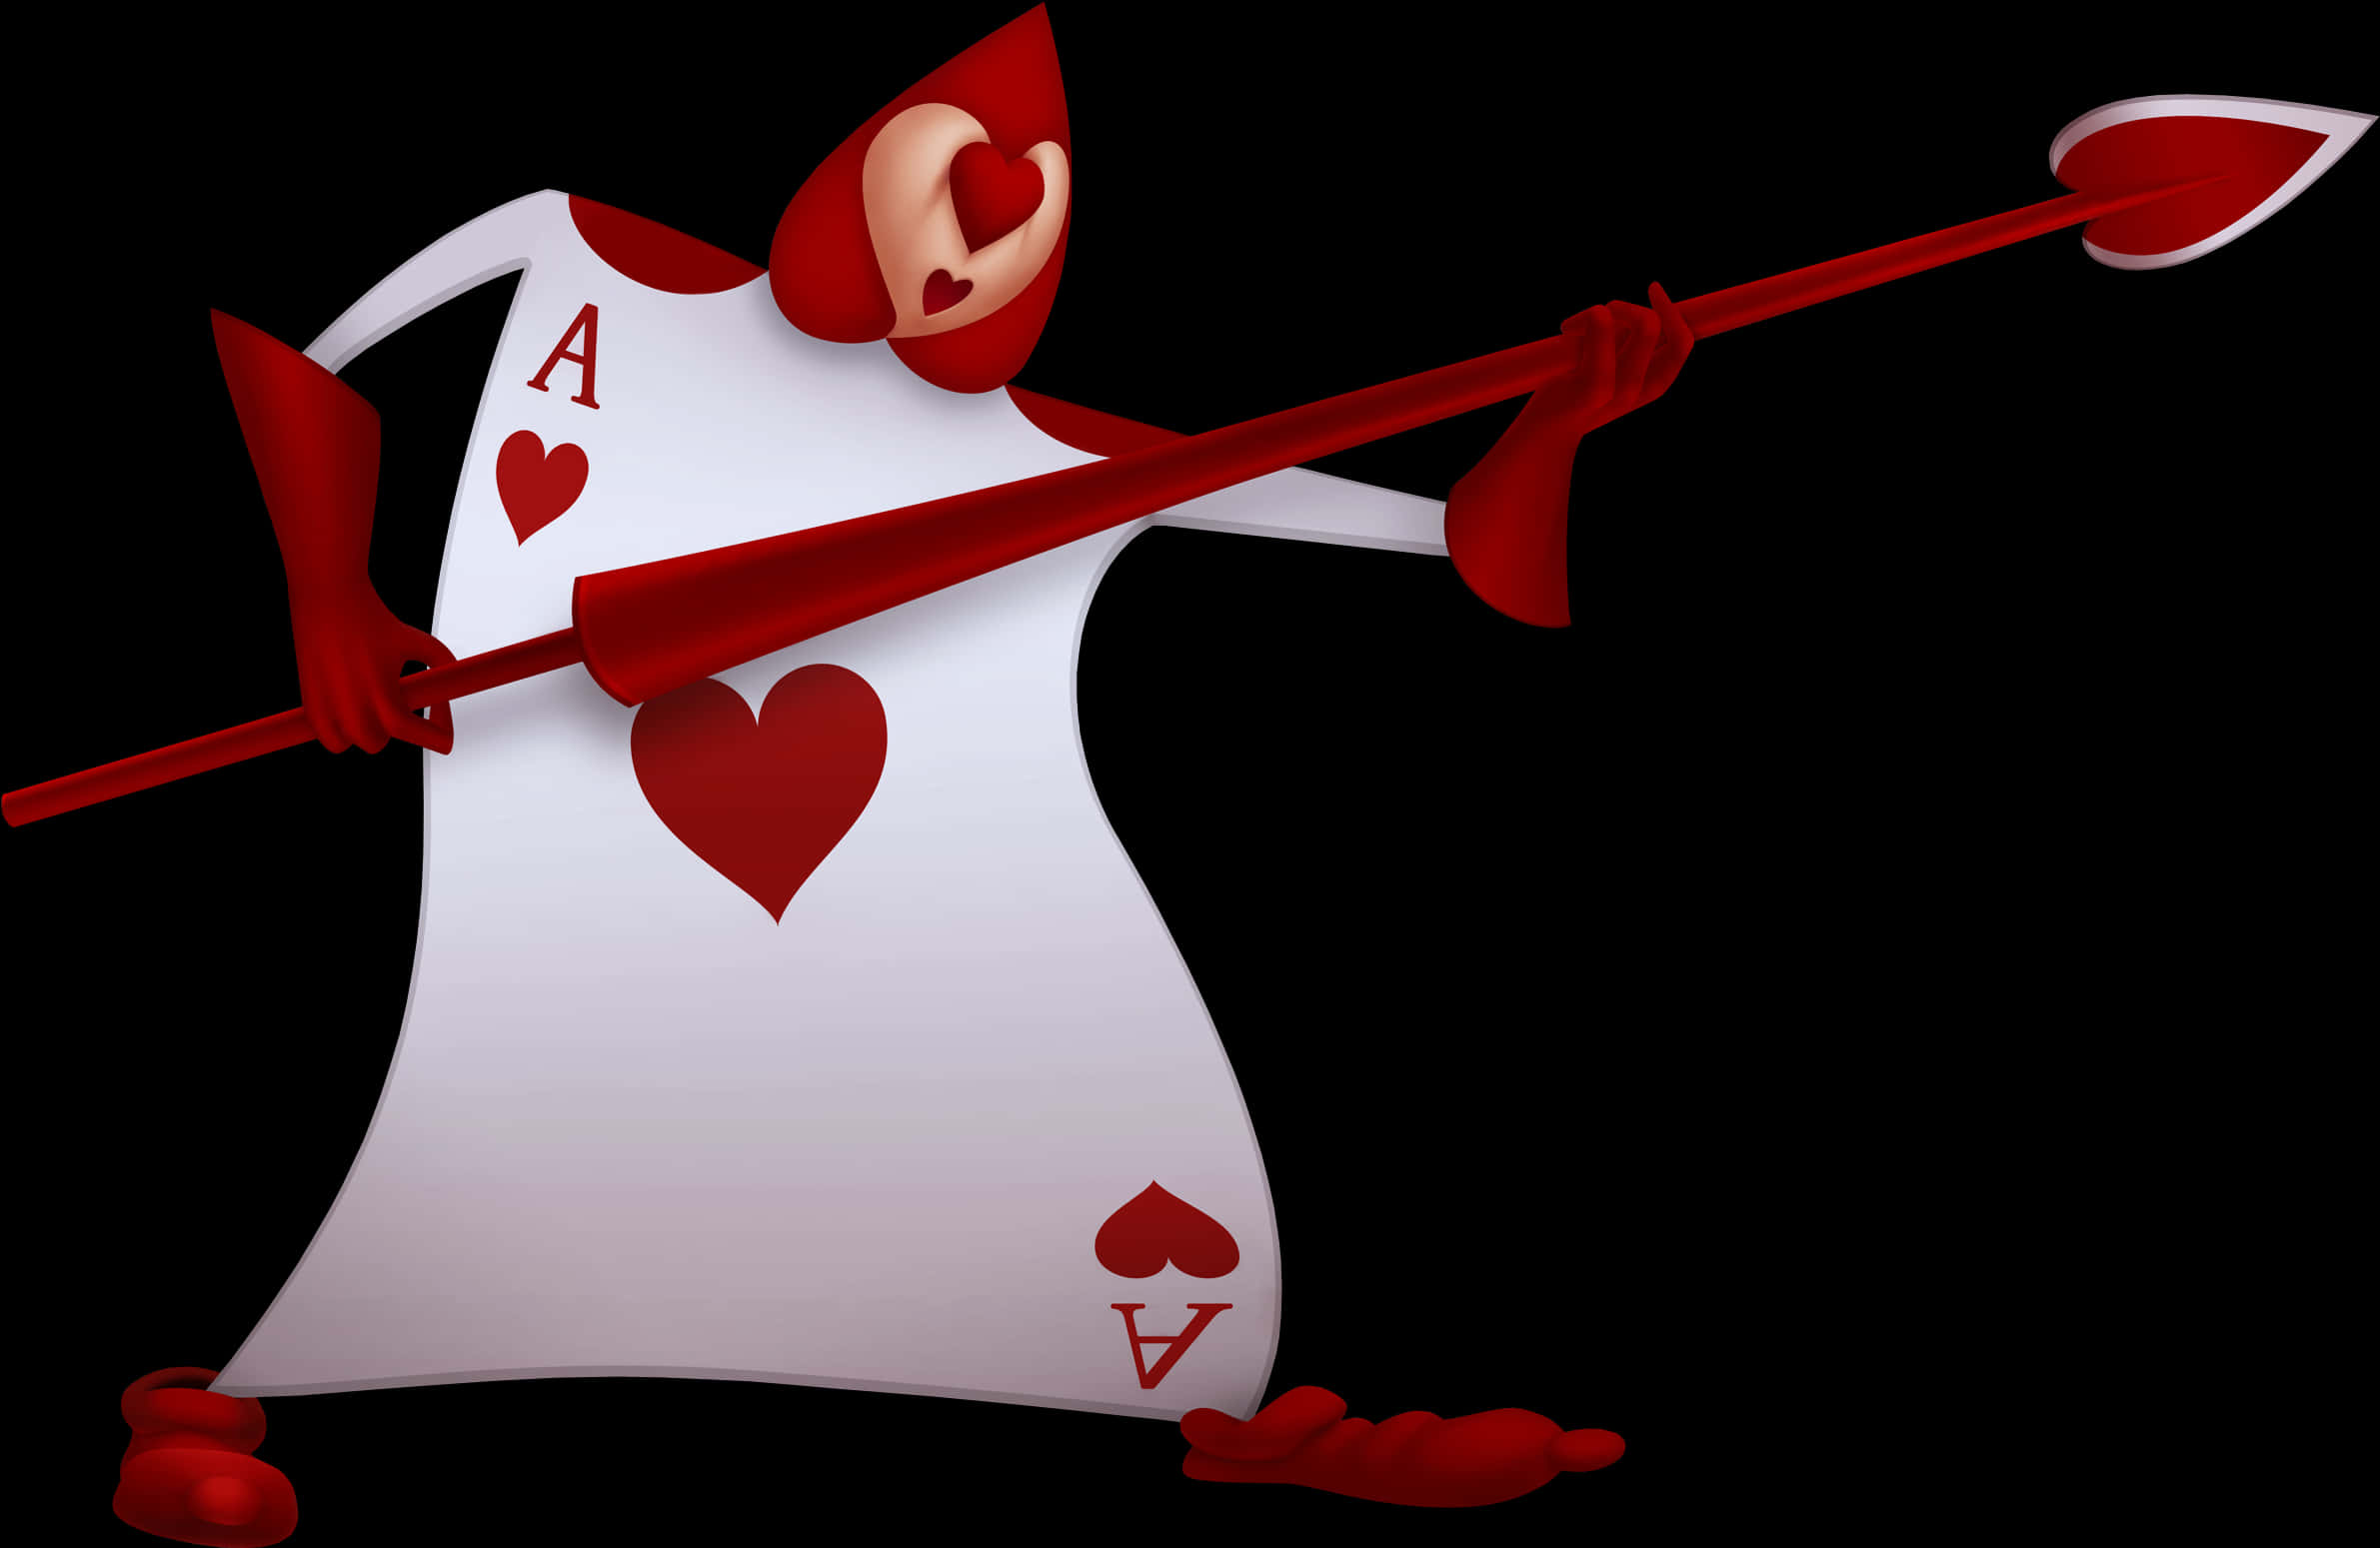 A Cartoon Of A Card Suit Holding A Rifle